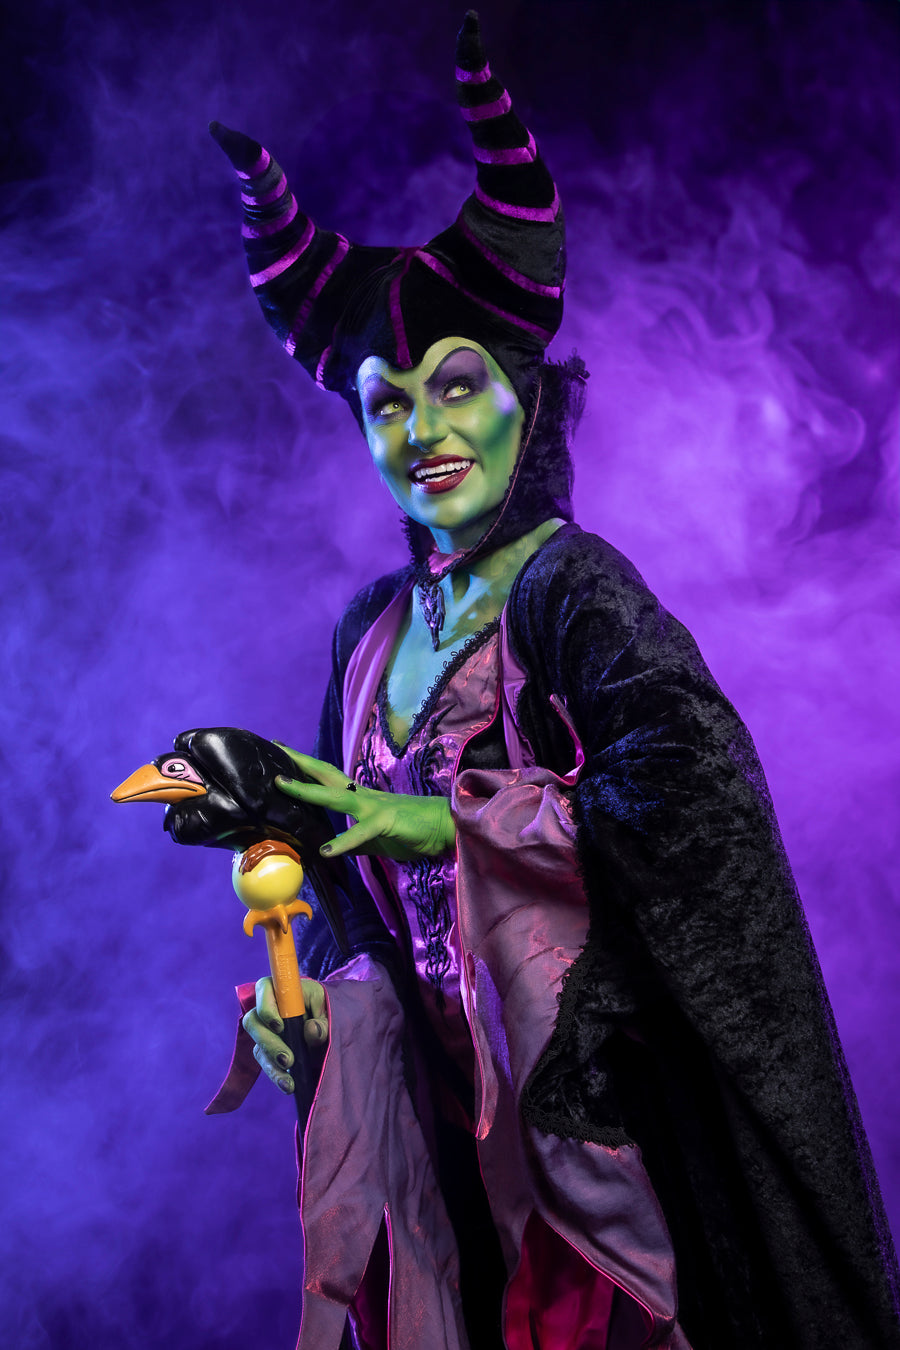 The premier destination for Cinemagraphic Makeup Artistry on the Mornington Peninsula. Welcome to the Little Shop of Horrors Makeup Artist & Salon. Professional Glamour & Beauty Makeup. Character Makeup & Bodypainting. Halloween Special Effects Makeup. Wig Styling.